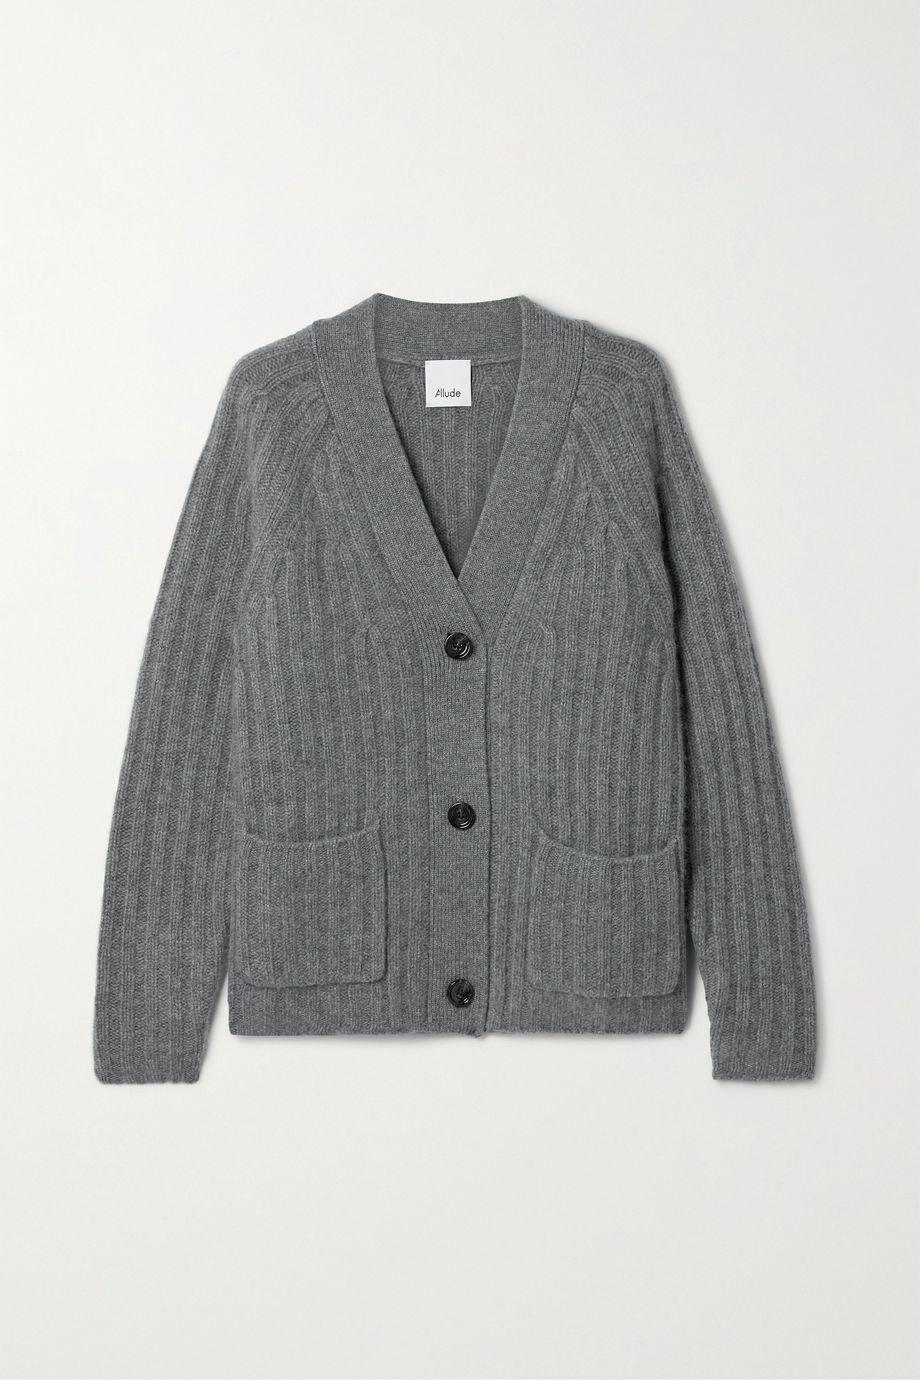 Ribbed cashmere cardigan by ALLUDE